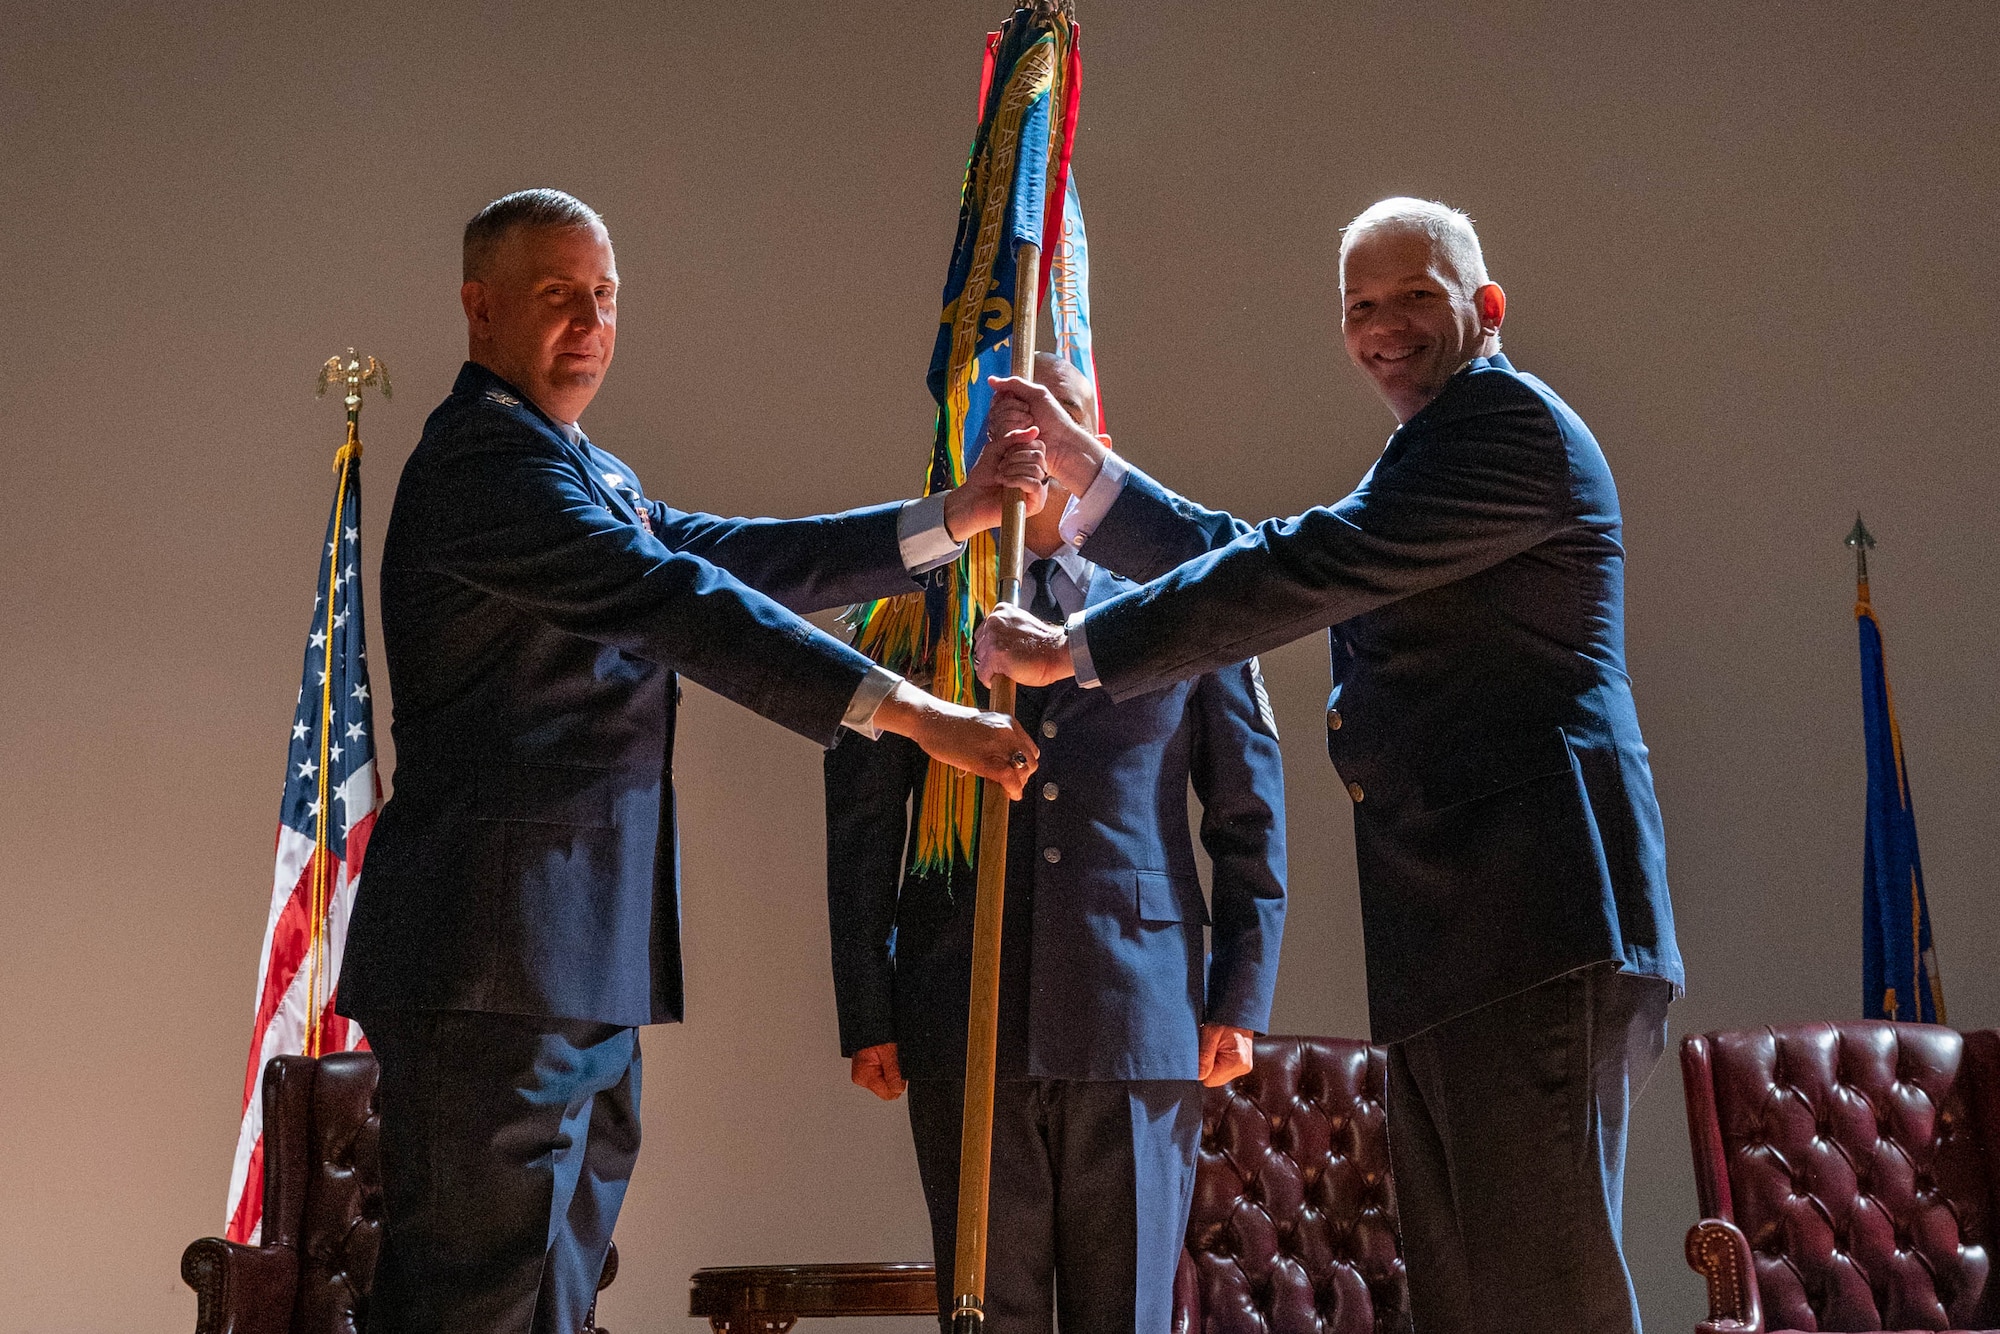 Lt. Col. Jason L. Brooks assumed command of the 315th Maintenance Squadron from the relinquishing commander, Lt. Col. Taylor Adams, at the base theater here, Jan 7th, 2023.

Col. Brett Newman, 315th Maintenance Group commander, officiated the ceremony and passed the unit guideon to Brooks.